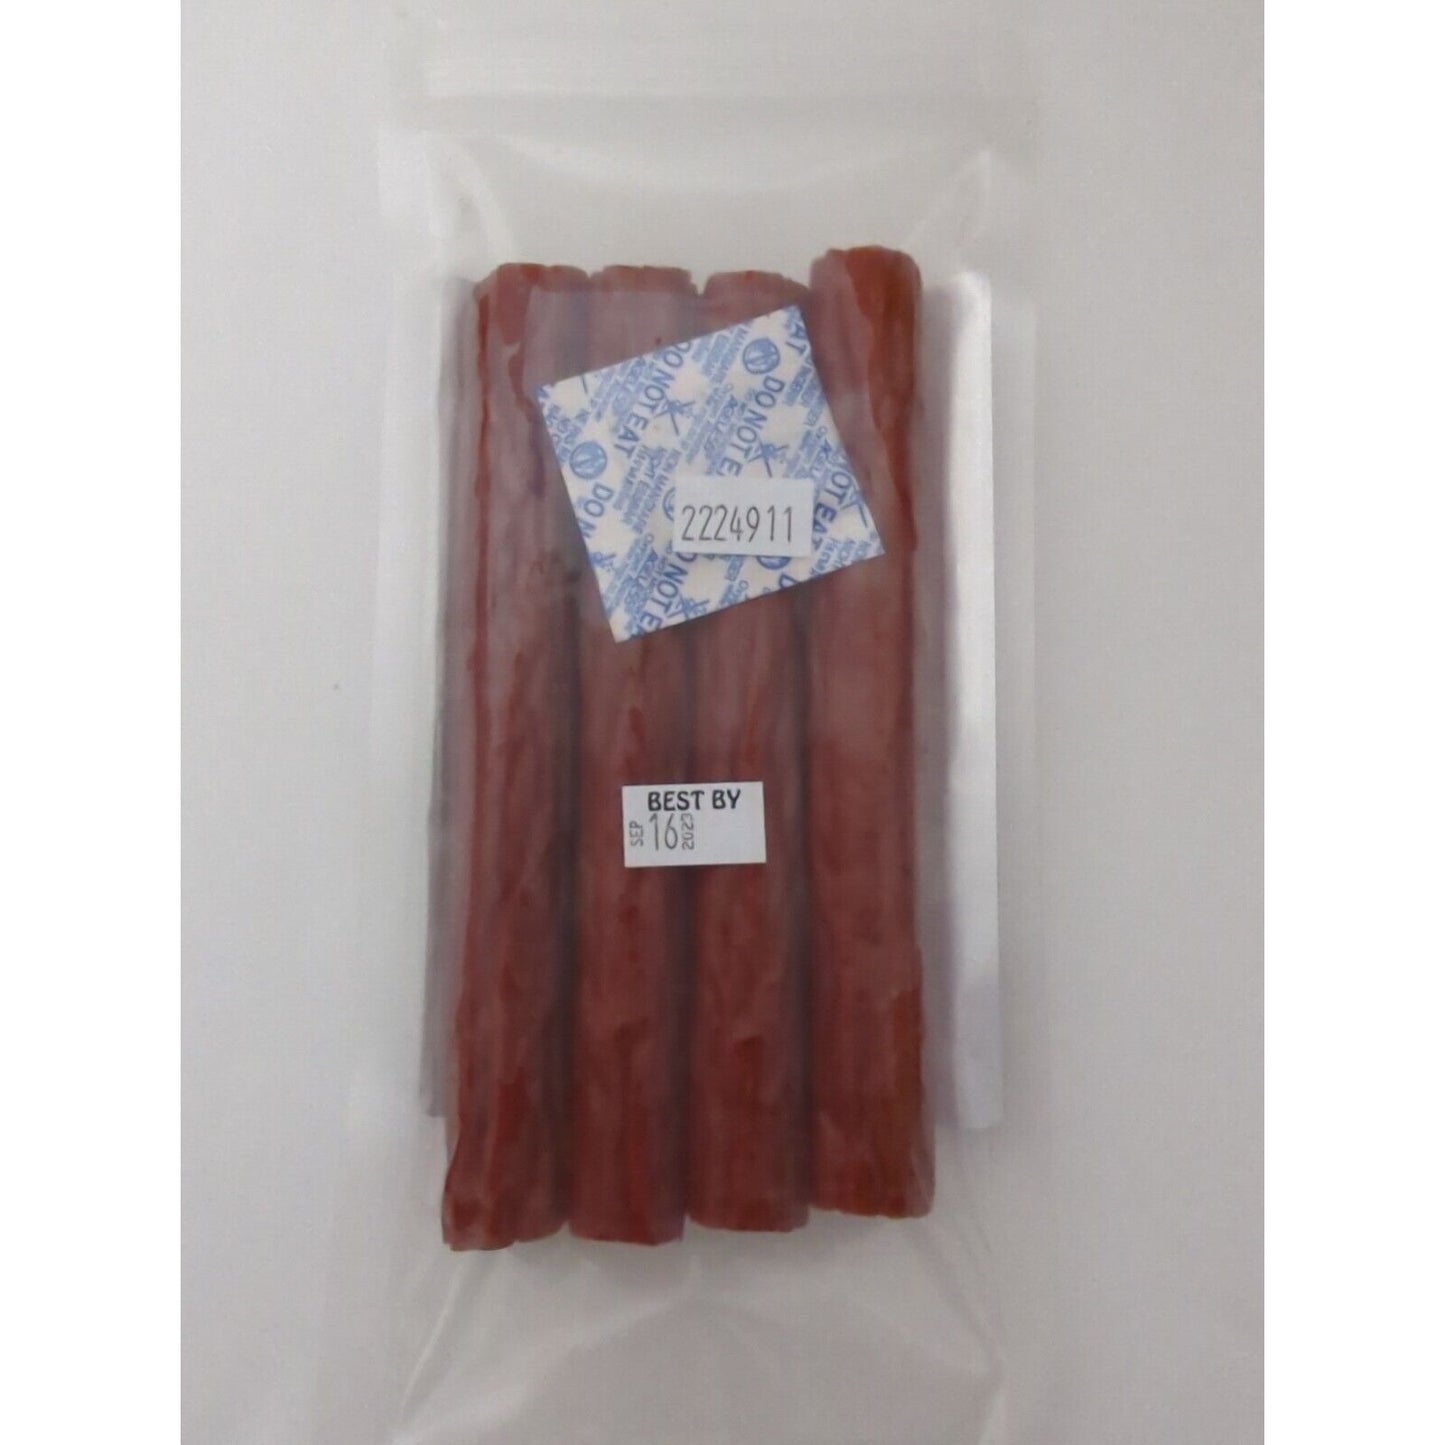 Raider Red Meats Beef & Pork Snack Sticks 4 Ounce Package